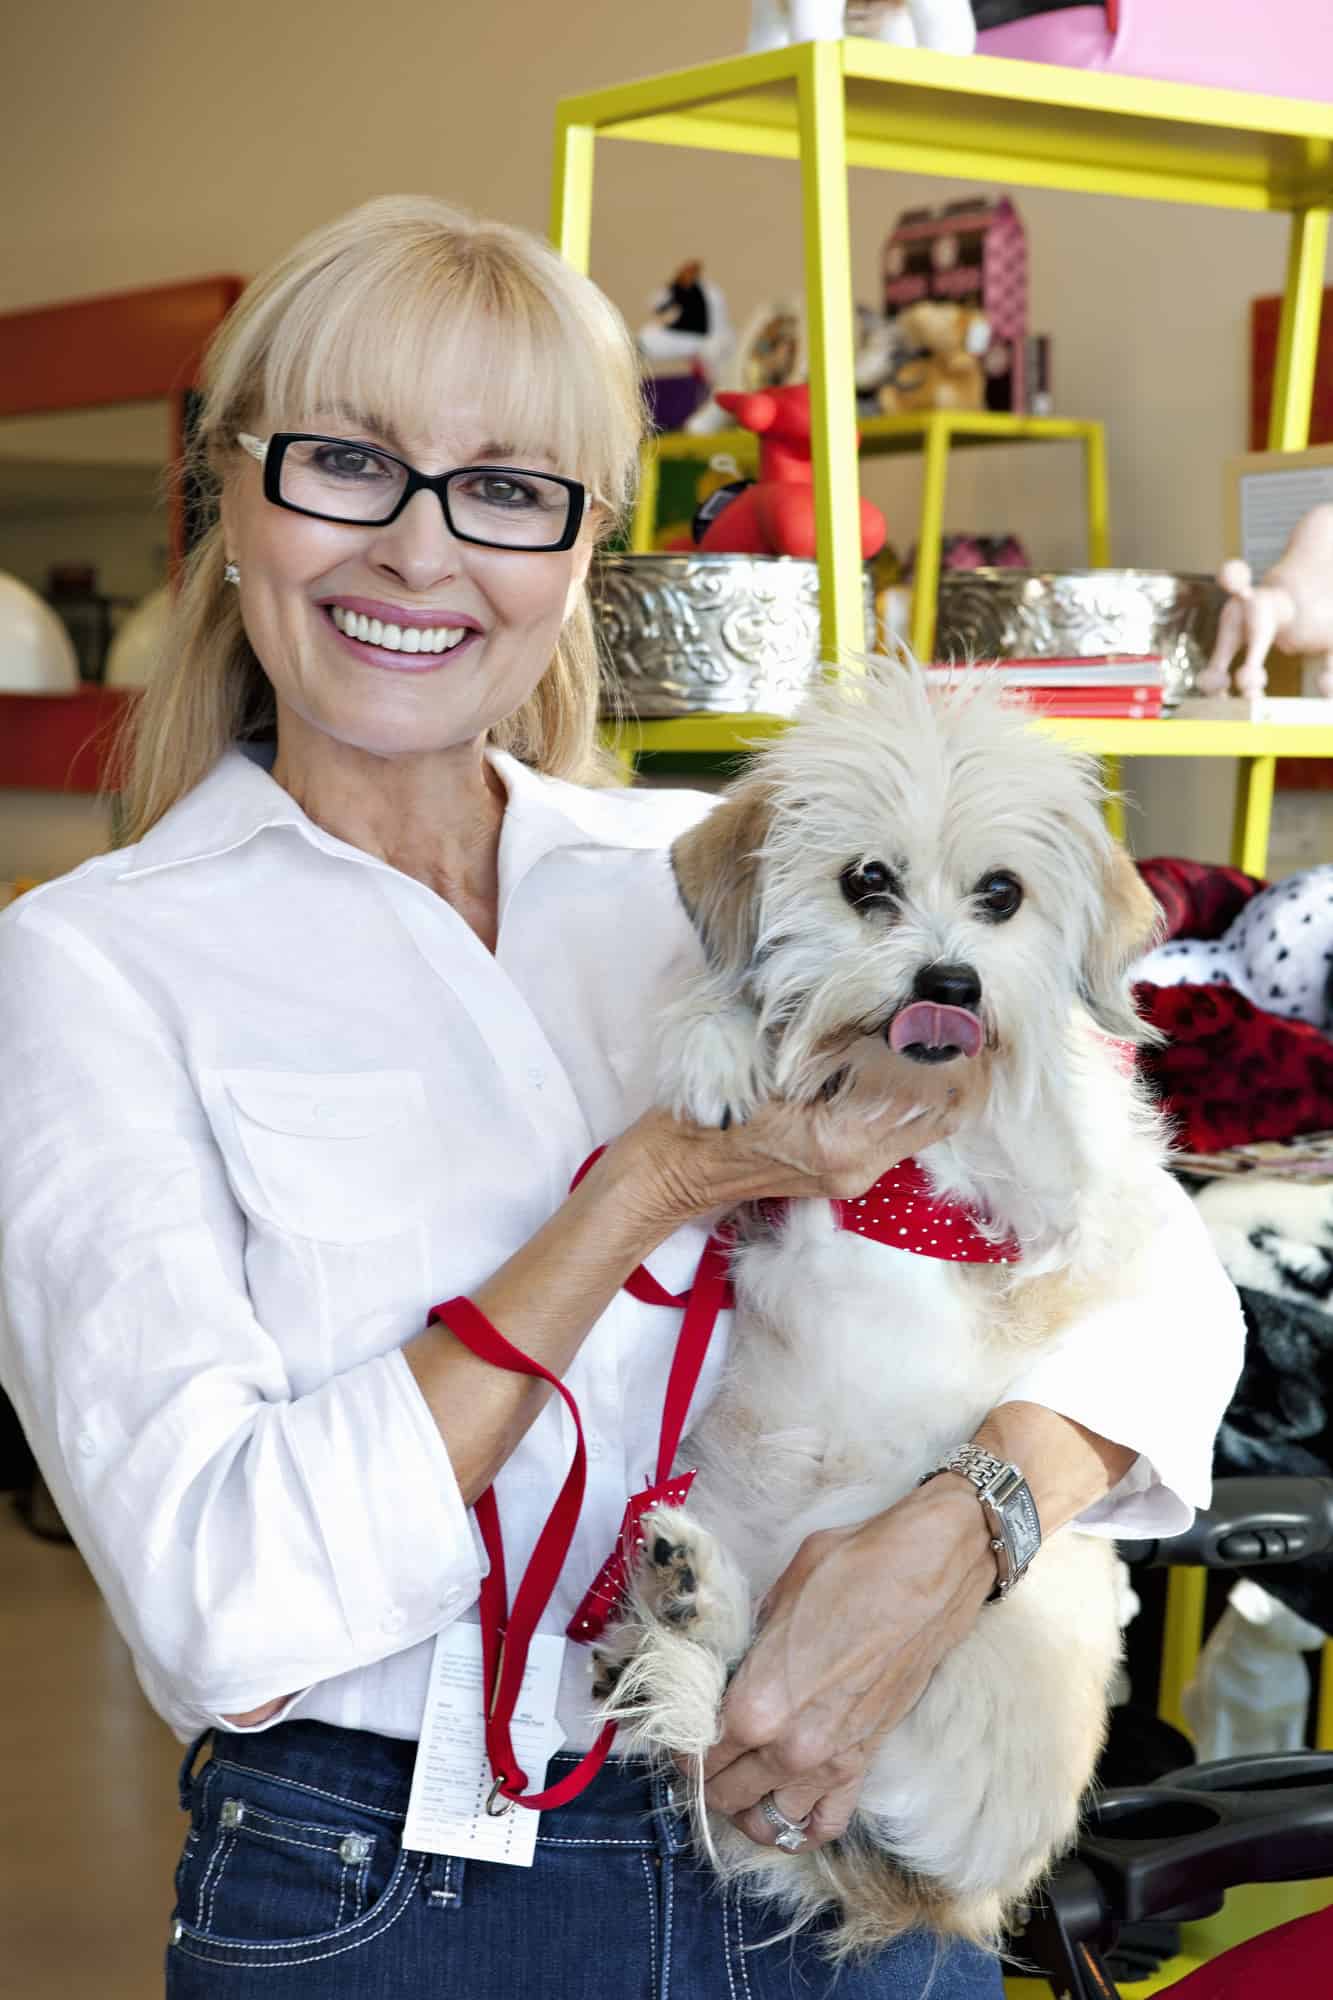 A woman in a white shirt holds a small white dog